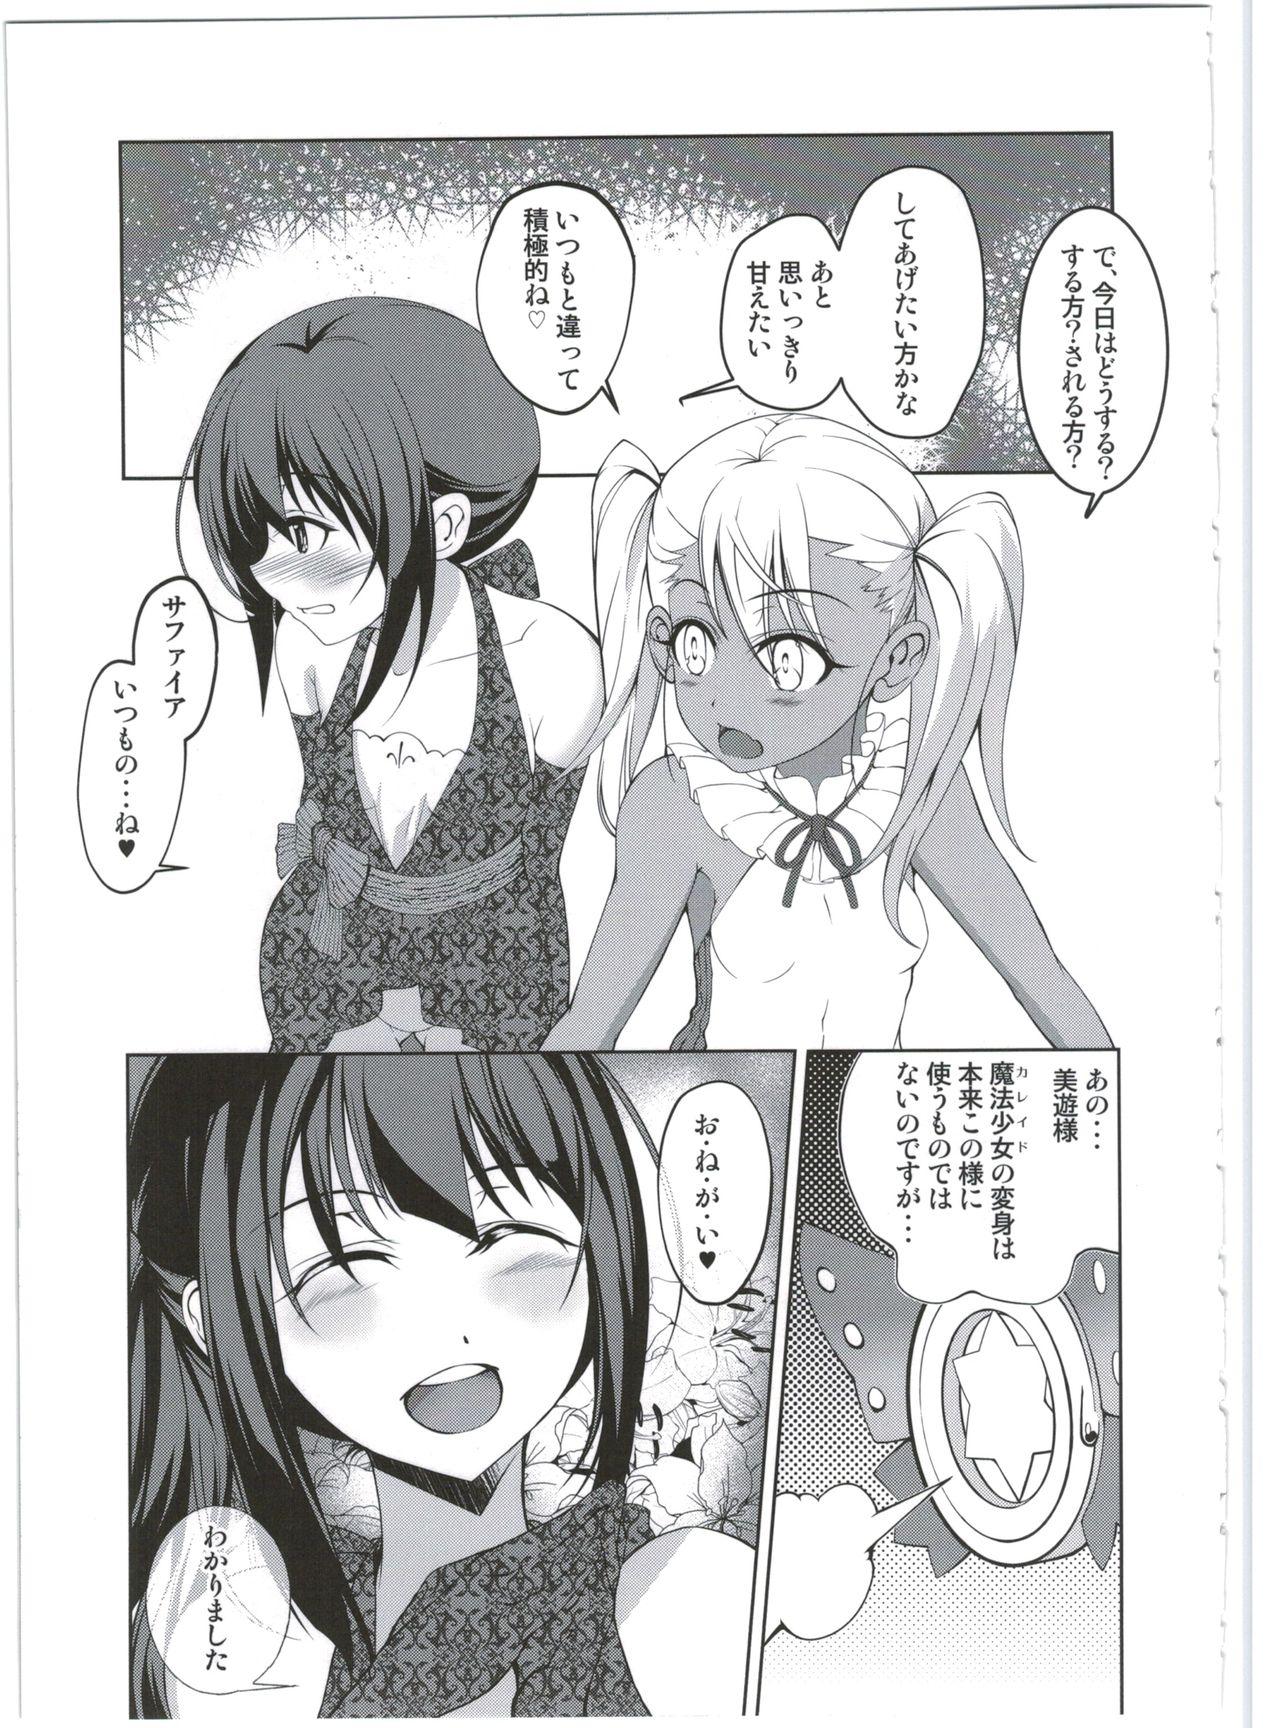 Ass Fucked SHG:03 - Fate kaleid liner prisma illya China - Page 11